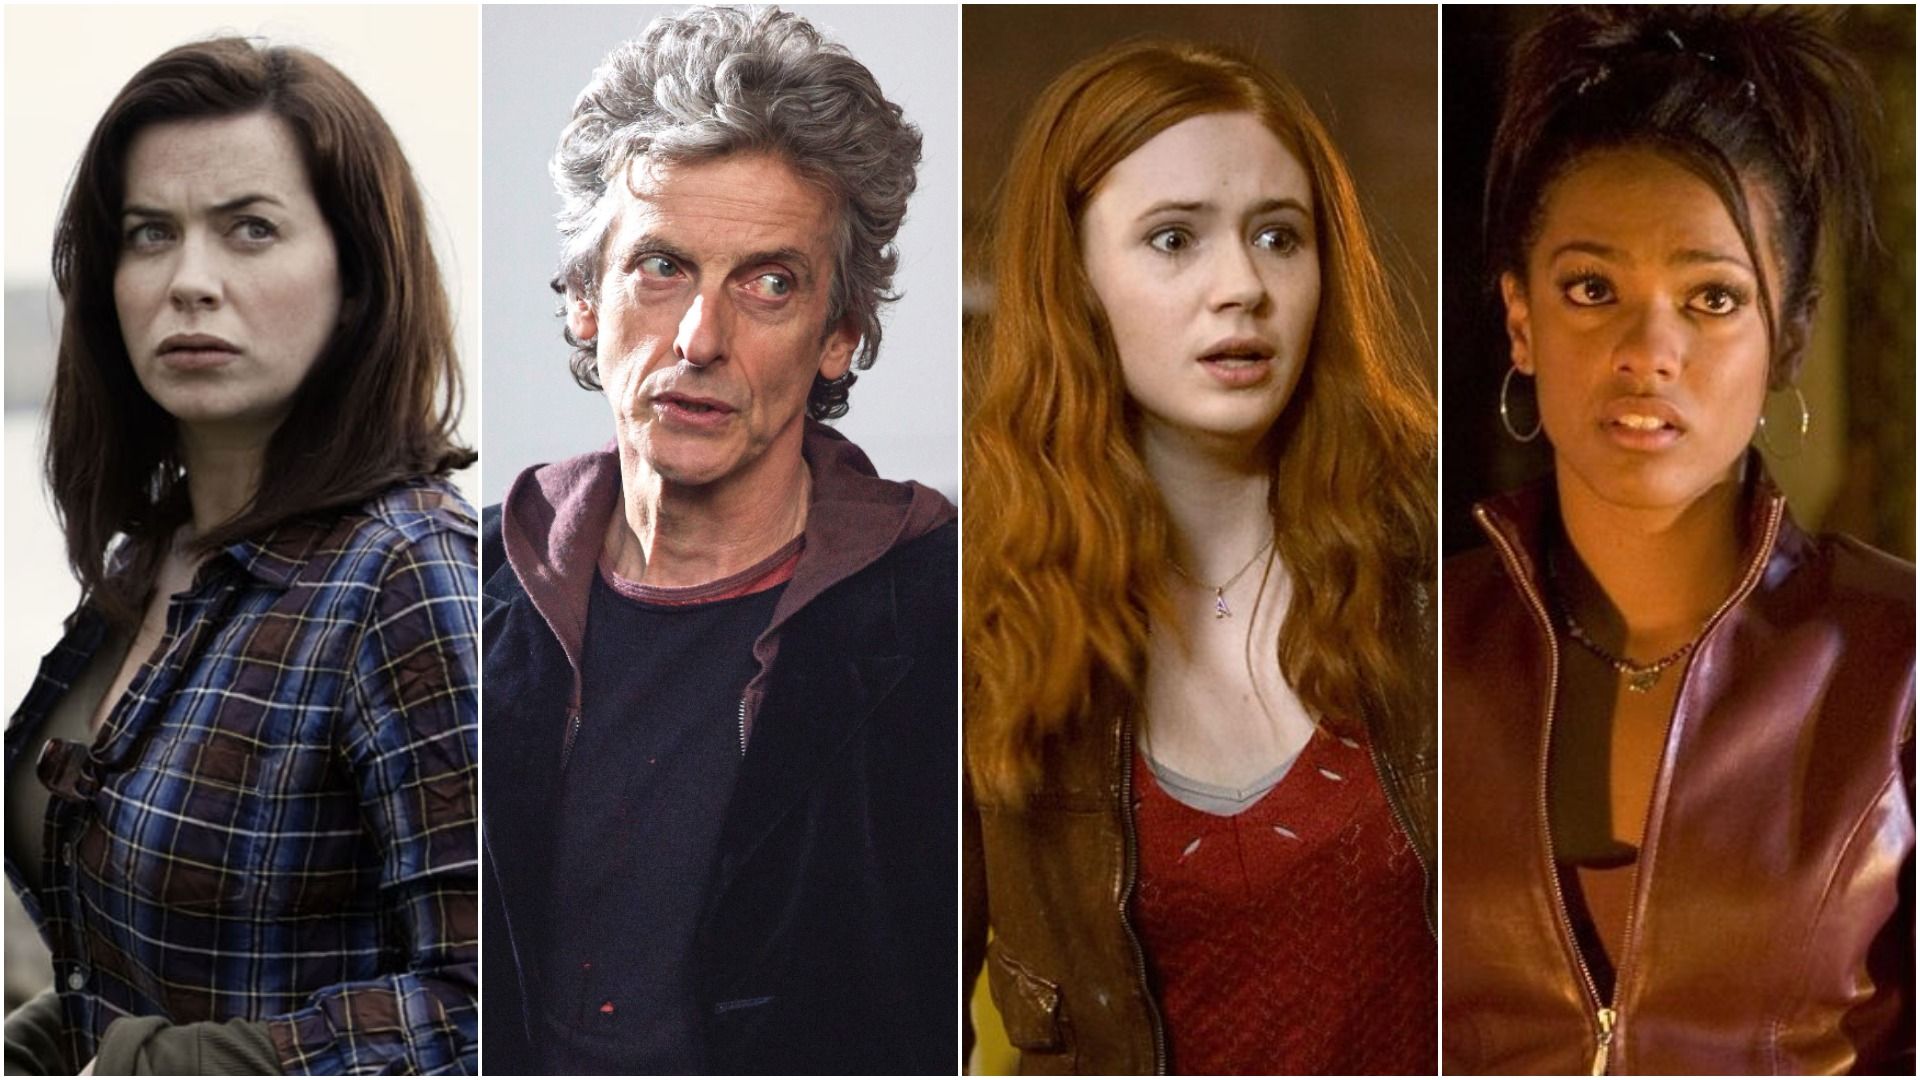 Doctor Who, Plot, Characters, Actors, & Facts